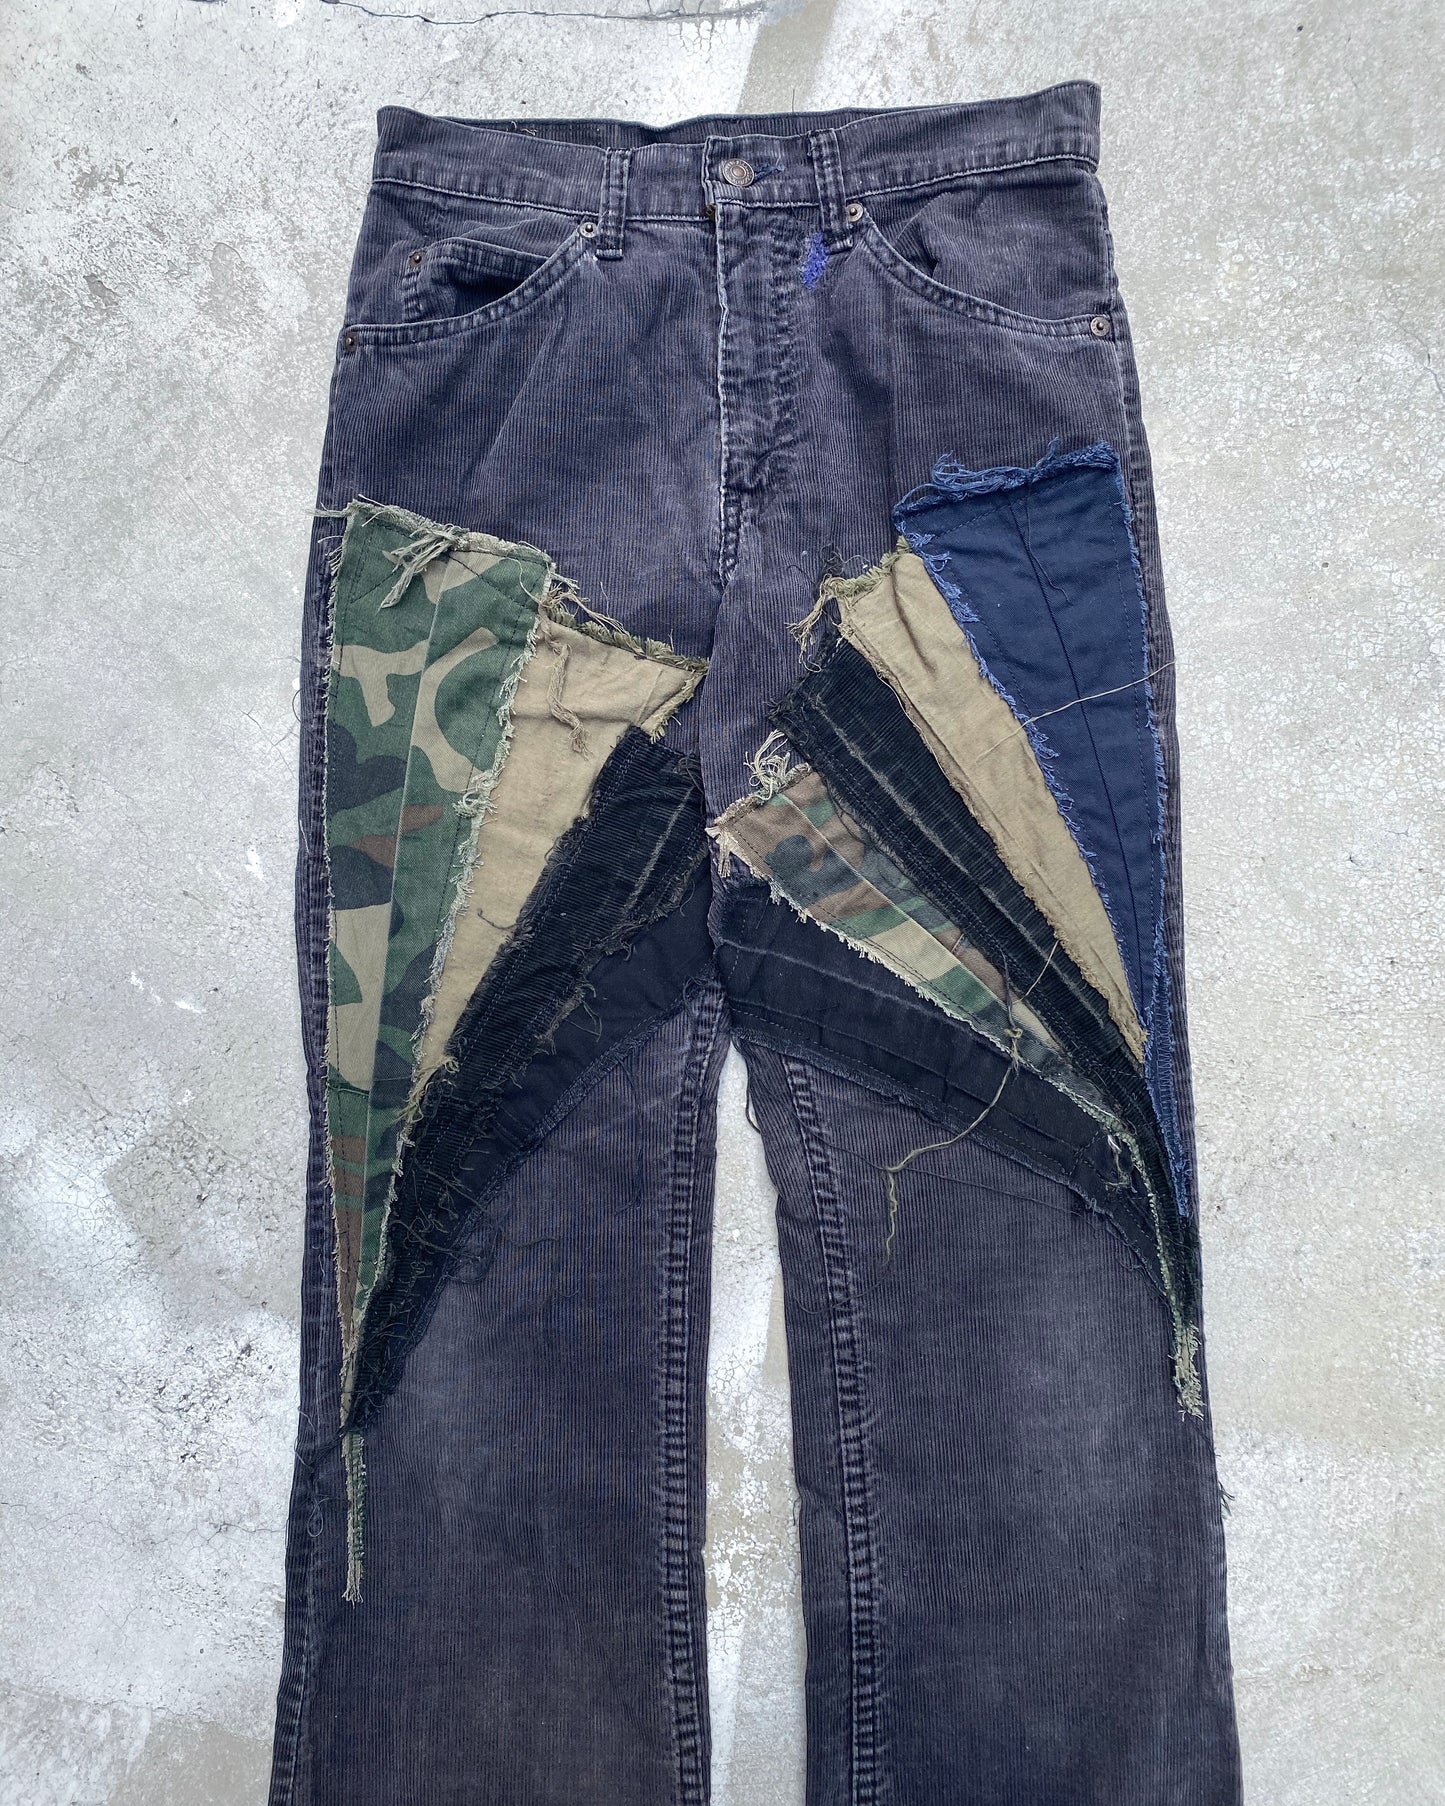 1970S CORDUROY PATCHED LEVI'S 517 FLARED JEANS (29X29)